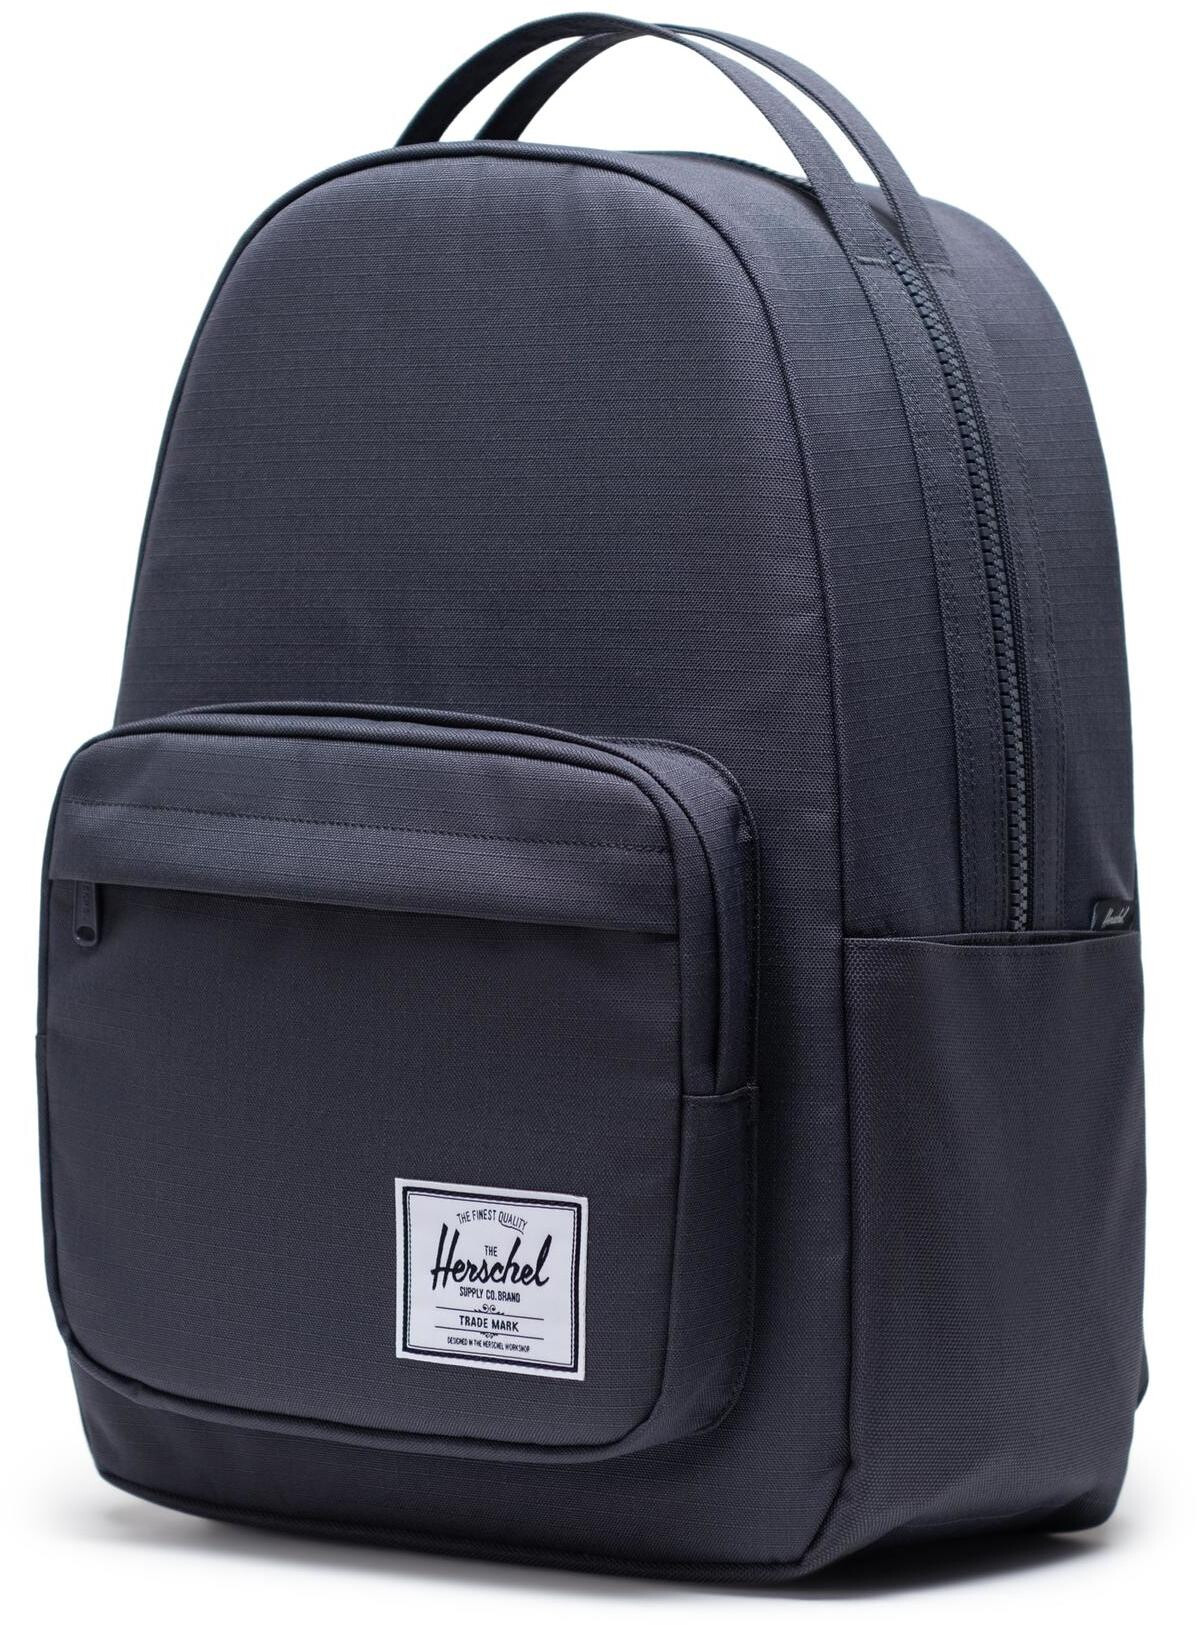 Herschel Miller Backpack periscope ripstop at addnature.co.uk